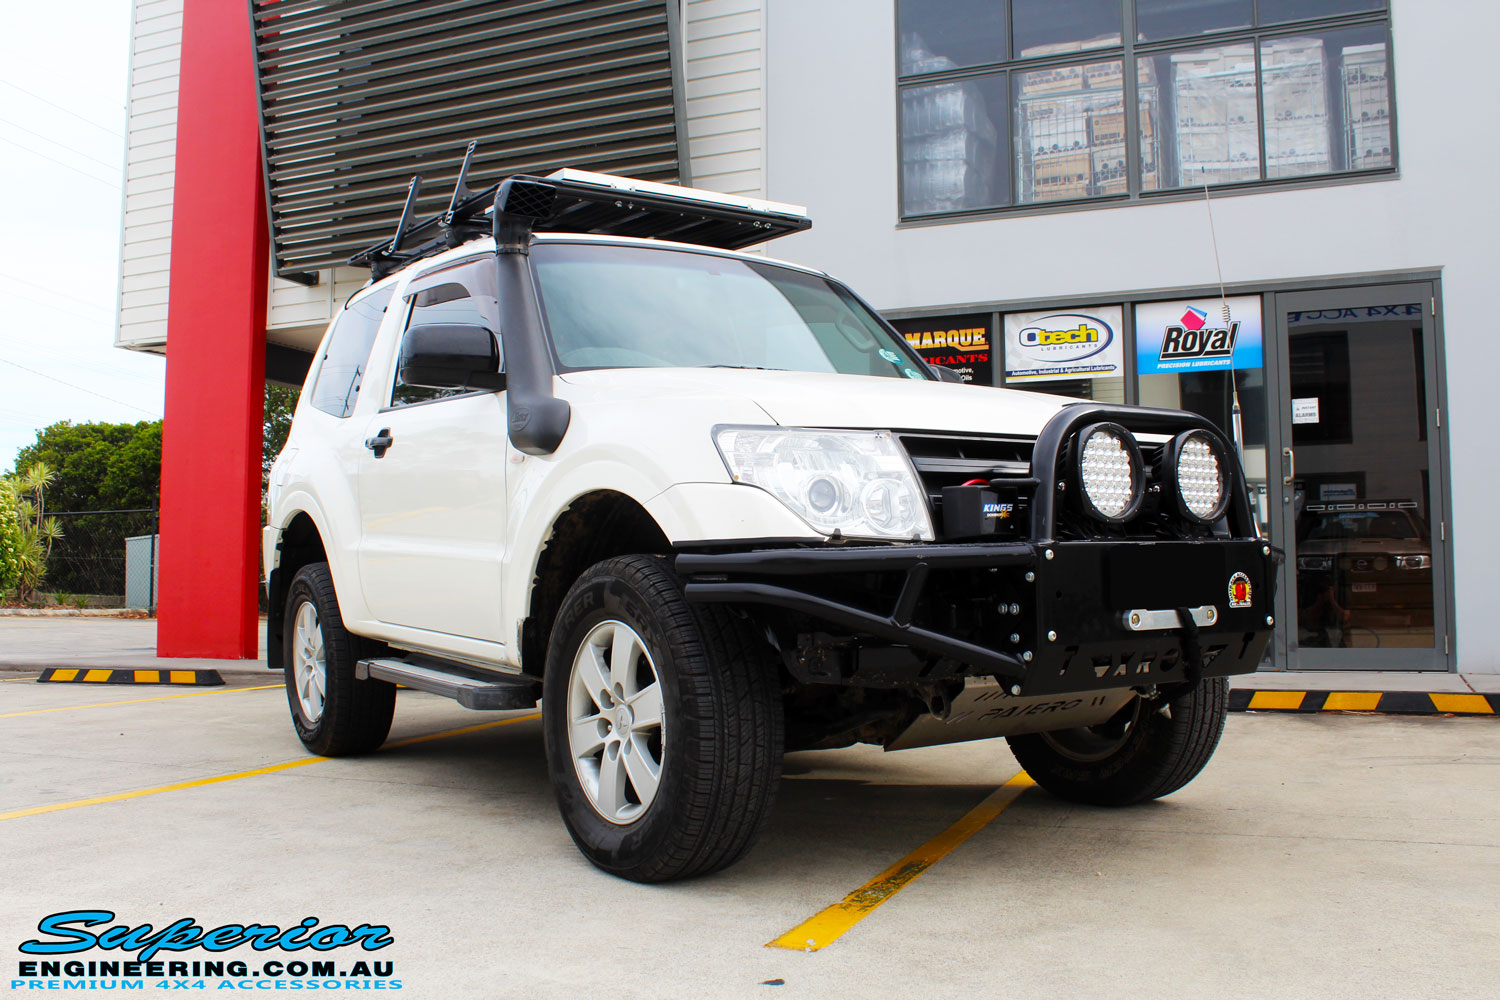 Right front side view of a White Mitsubishi Pajero SWB Wagon after fitment of a range of Superior and various other brands suspension components